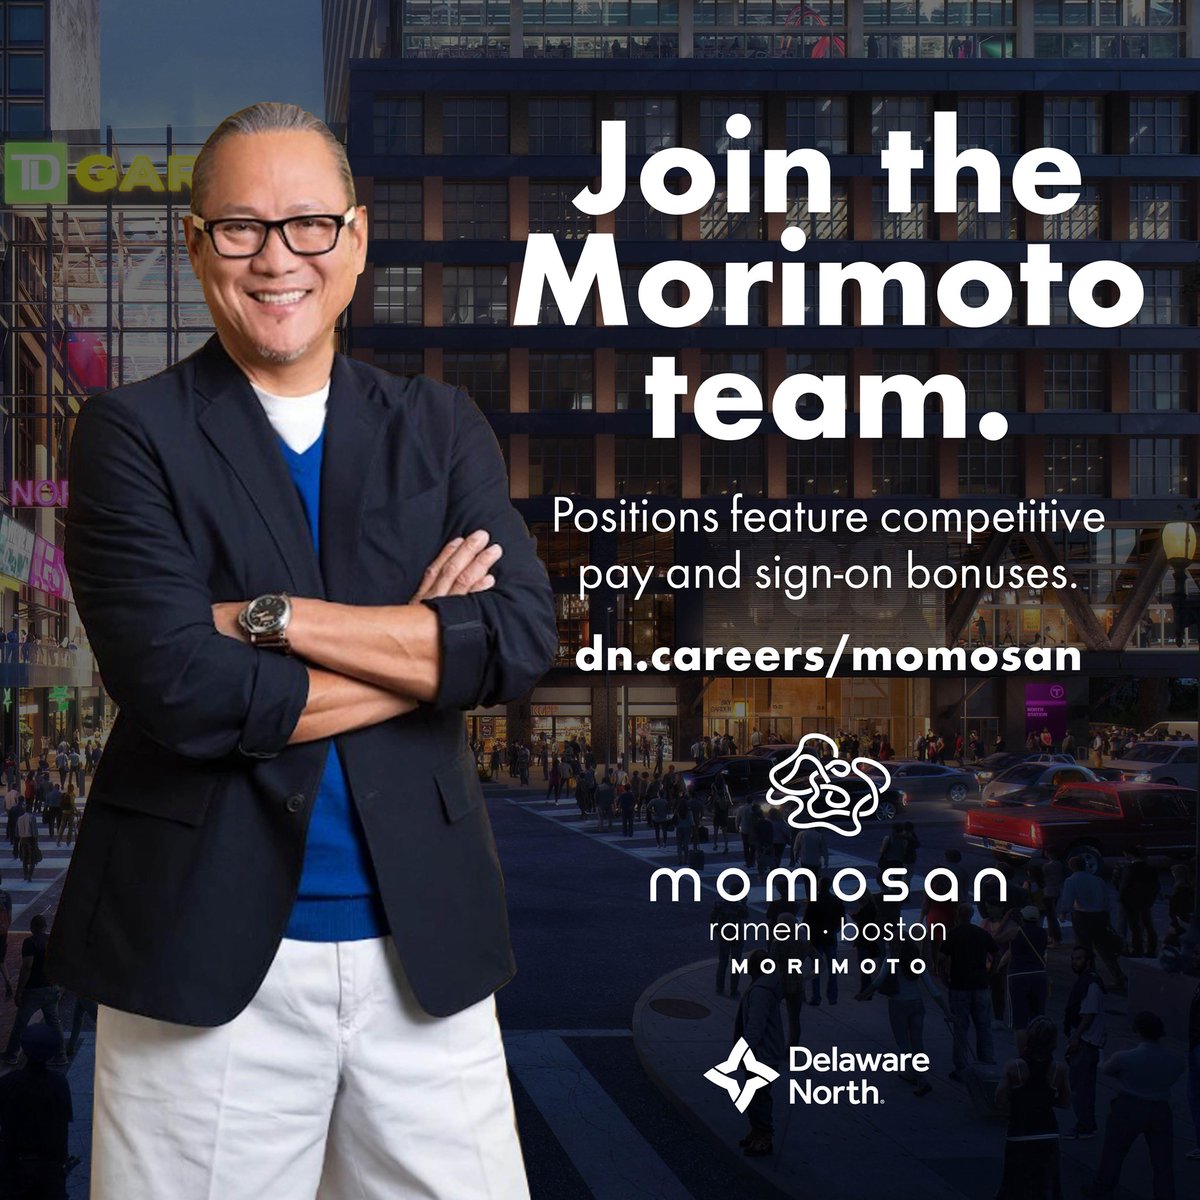 We're ramping up to open @MomosanBoston at #HubHallBoston very soon! This means we are looking to fill several FOH and BOH positions at my newest Momosan location. If you have an interest in the foodservice industry visit the link below to apply today! careers.delawarenorth.com/momosan-boston